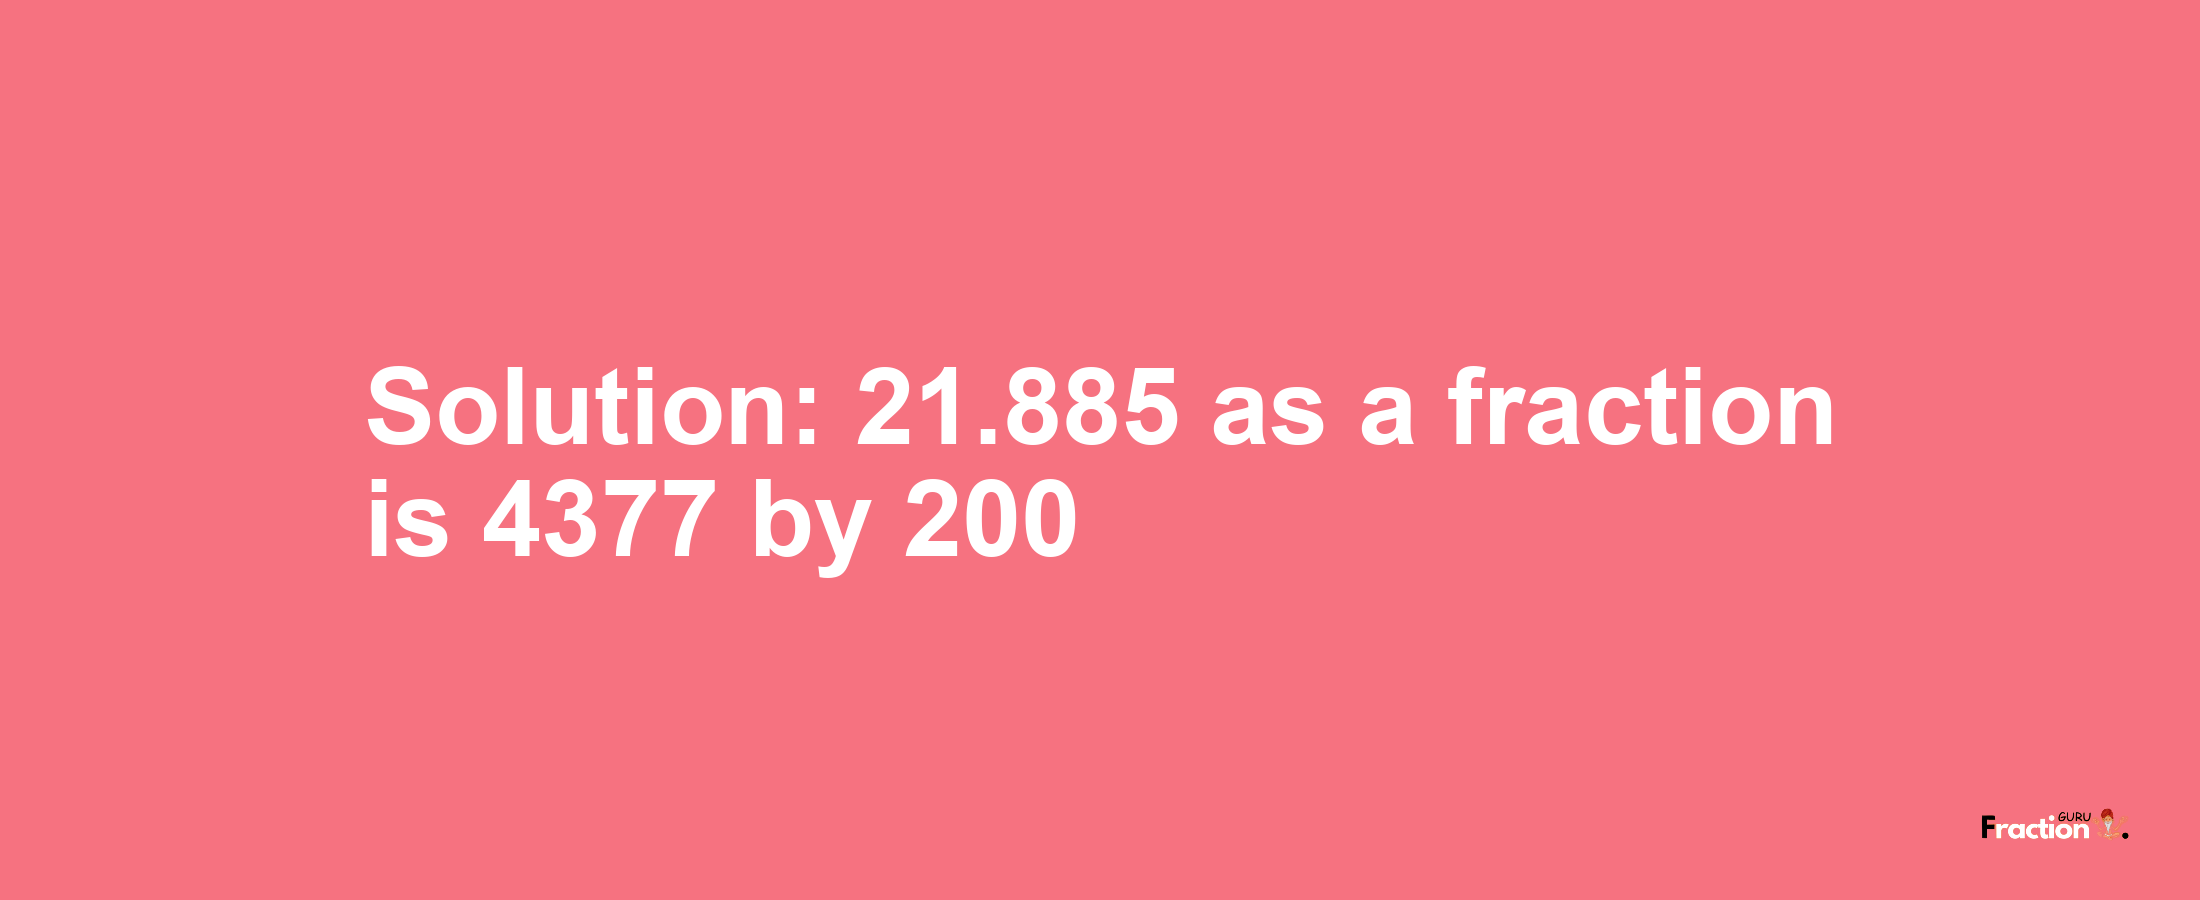 Solution:21.885 as a fraction is 4377/200